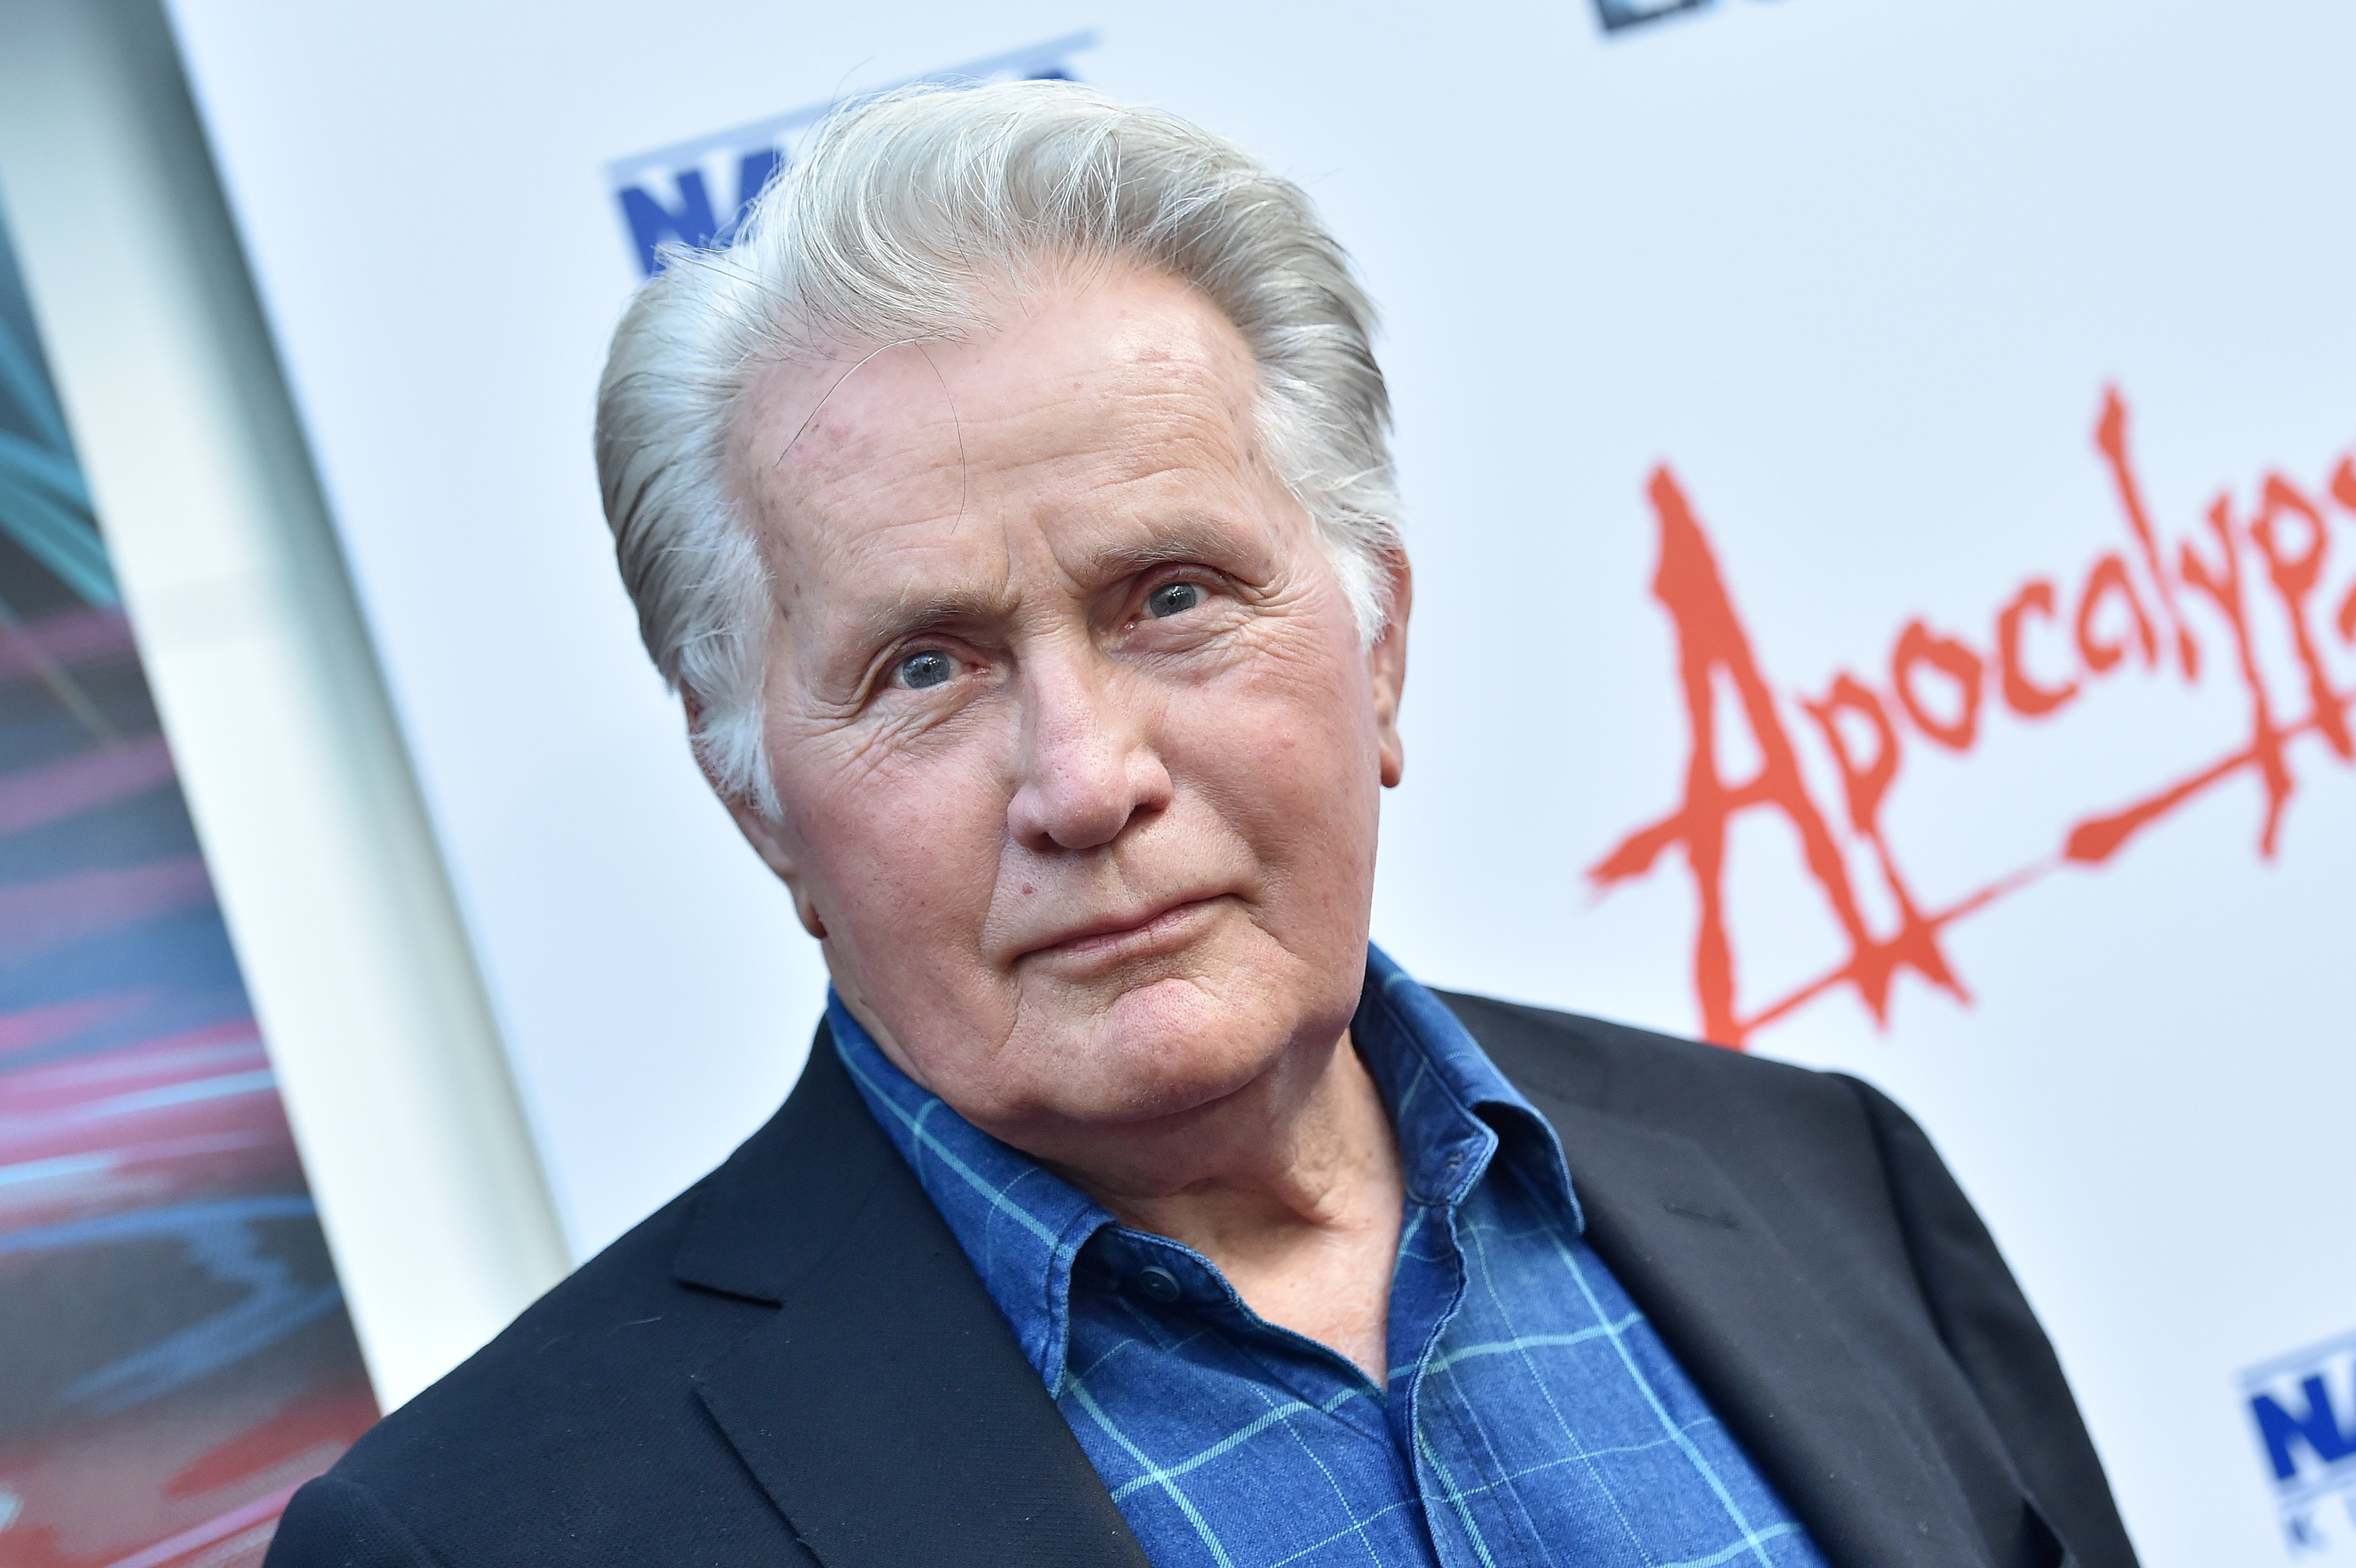 Actor Martin Sheen during the LA premiere of "Apocalypse Now Final Cut" at ArcLight Cinerama Dome on August 12, 2019 in Hollywood, California. / Source: Getty Images